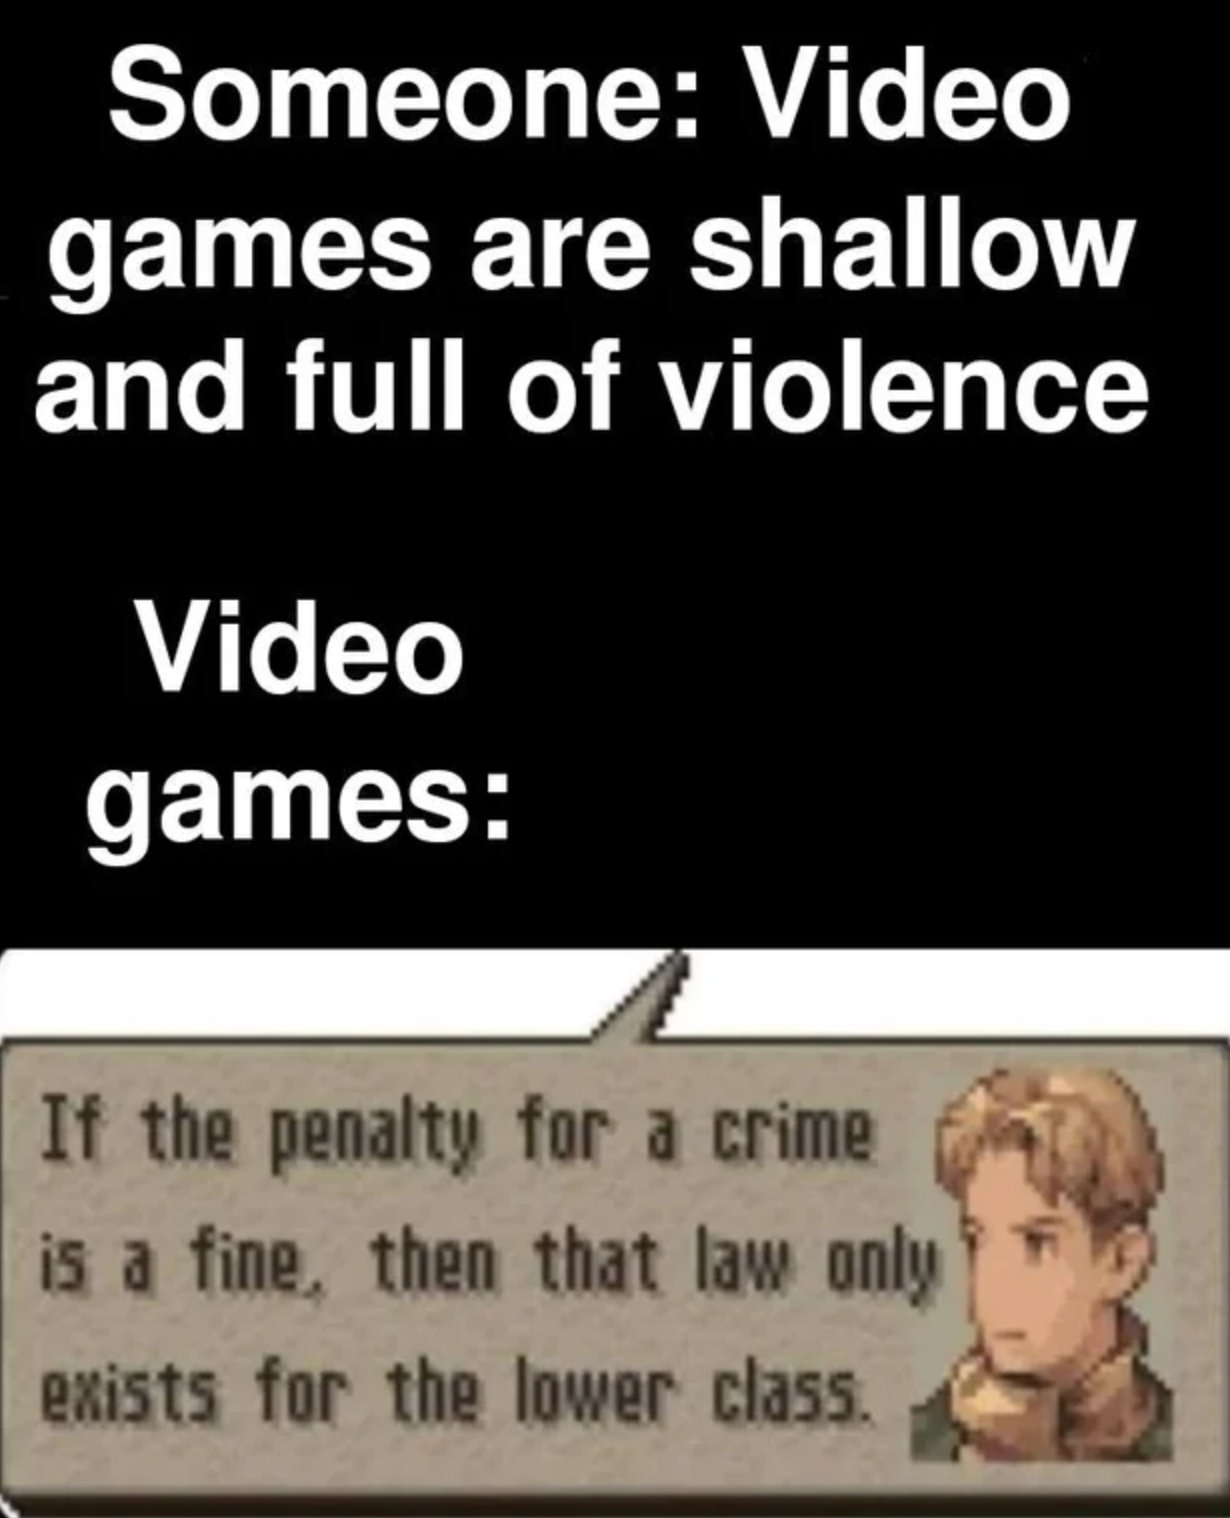 funny gaming memes - human behavior - Someone Video games are shallow and full of violence Video games If the penalty for a crime is a fine, then that law only exists for the lower class